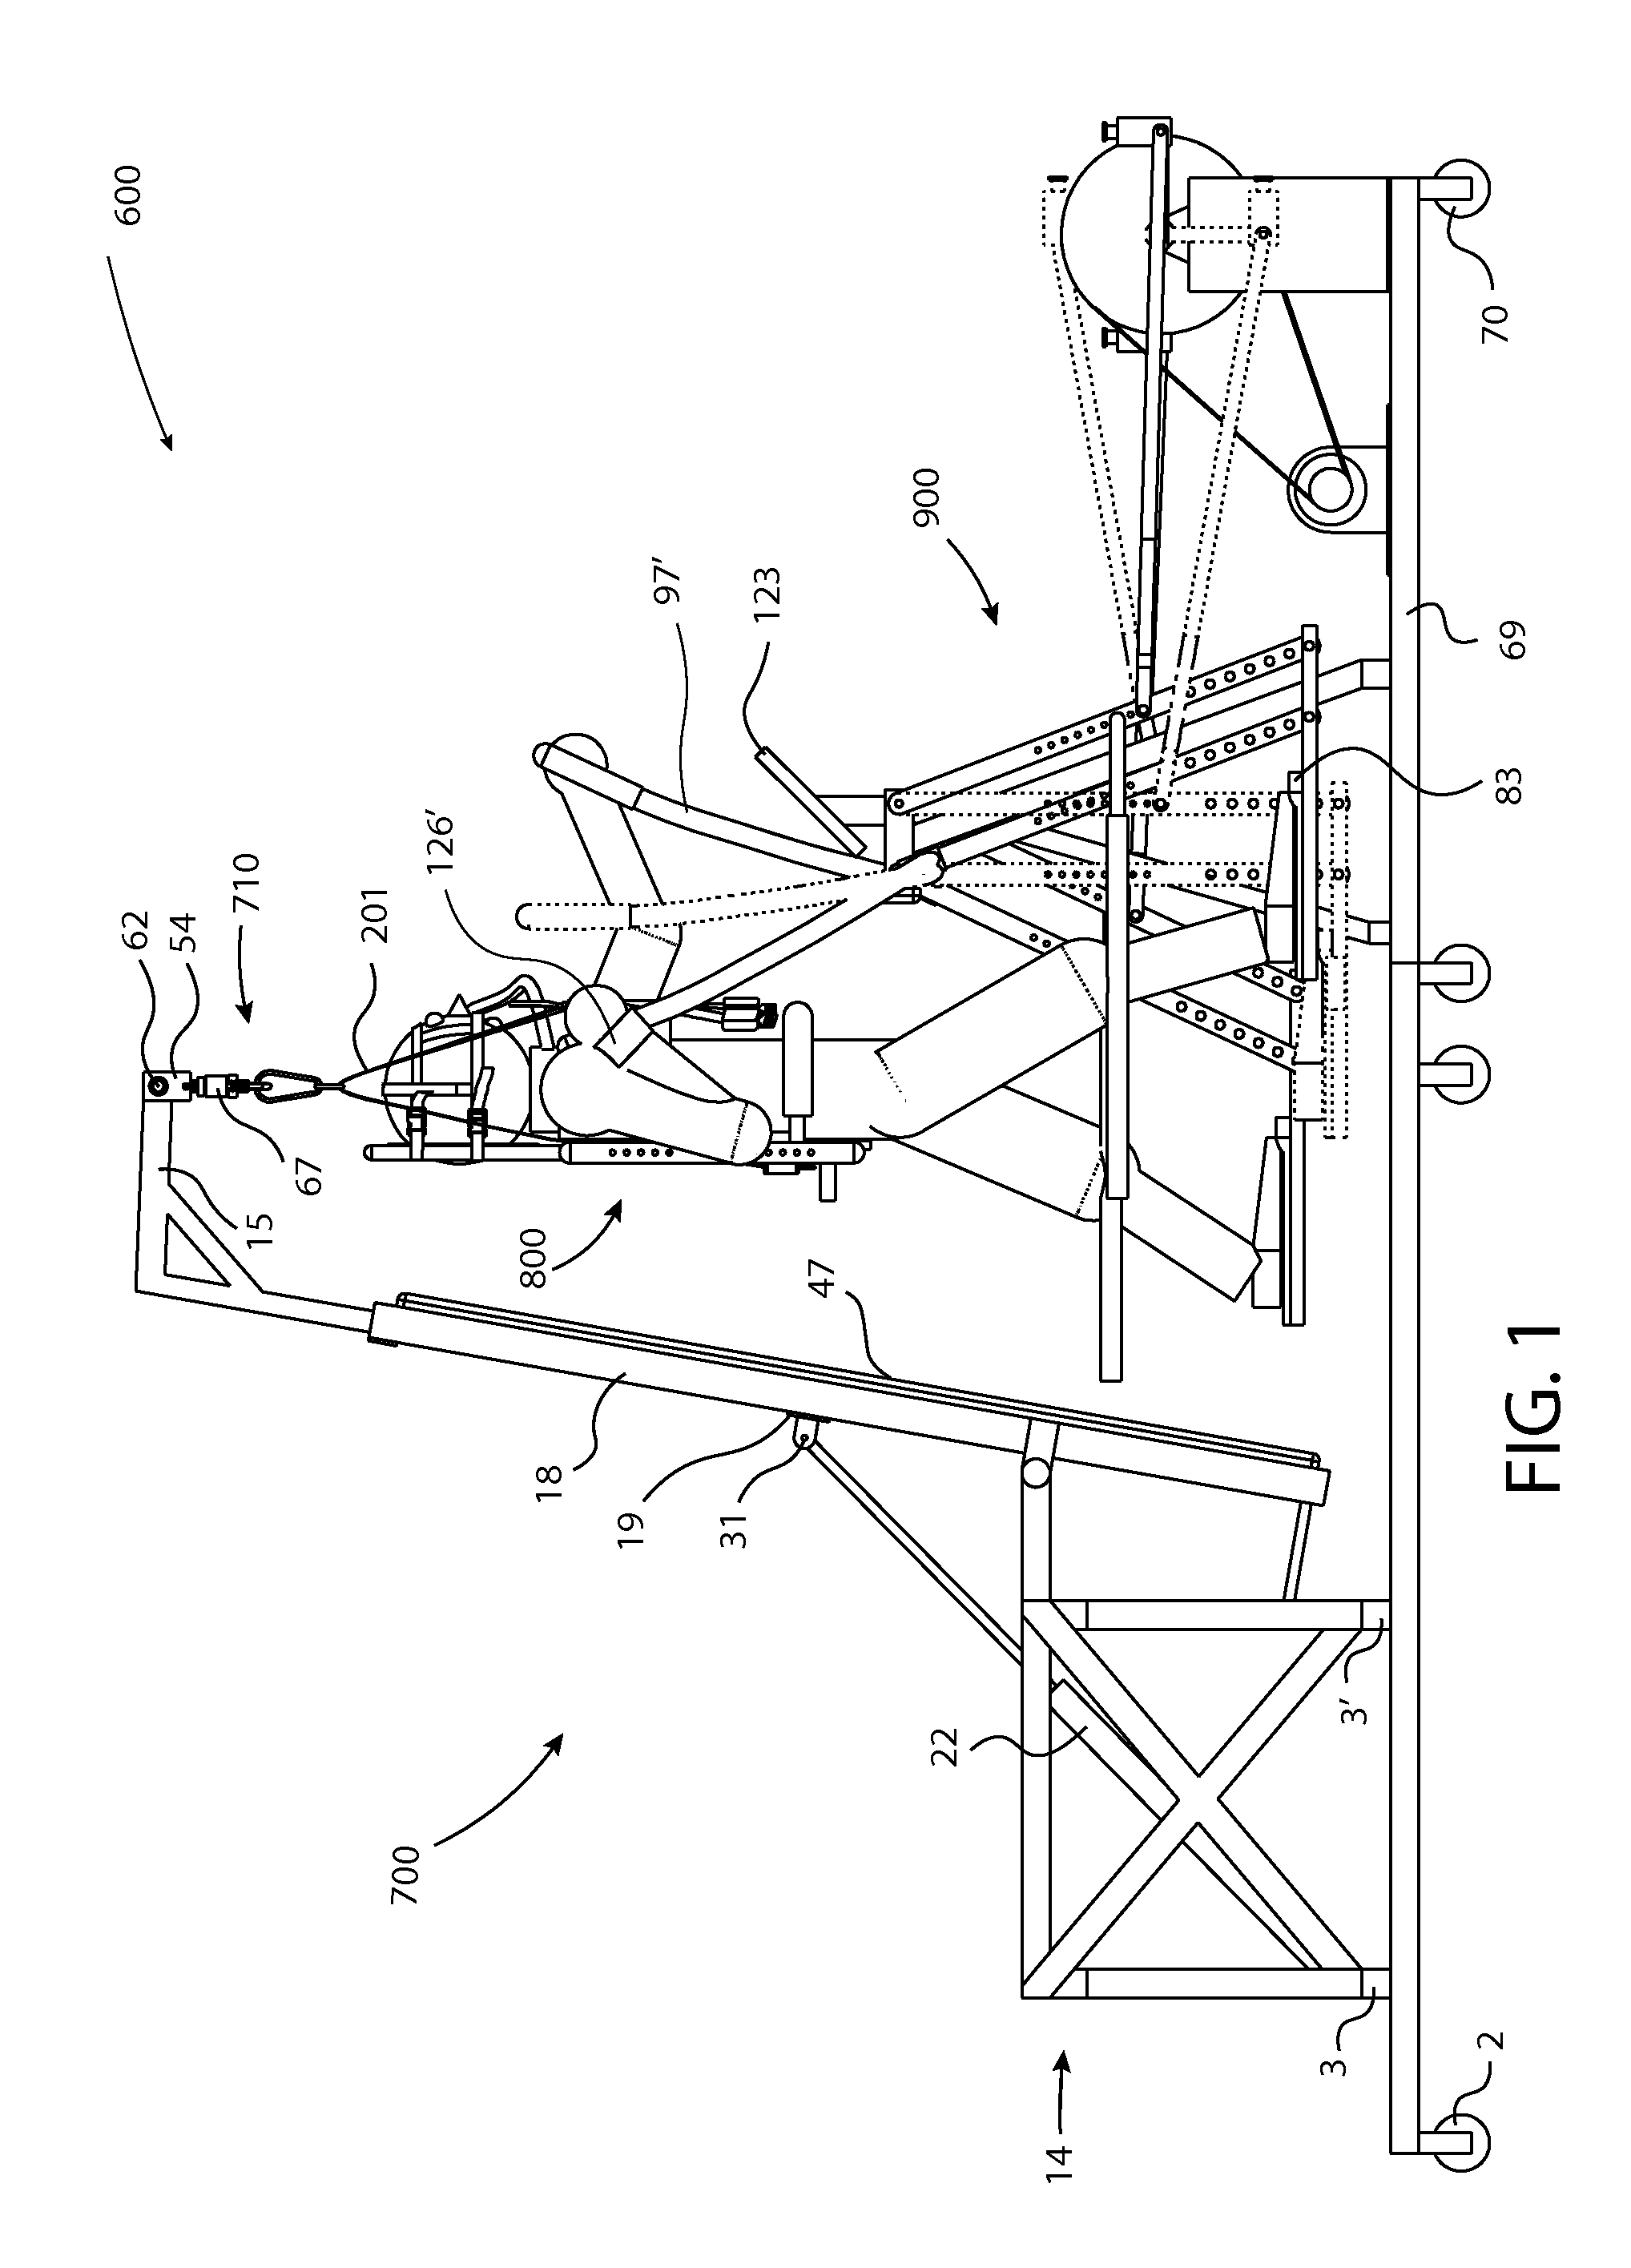 Motorized air walker and suspension system for paralyzed persons